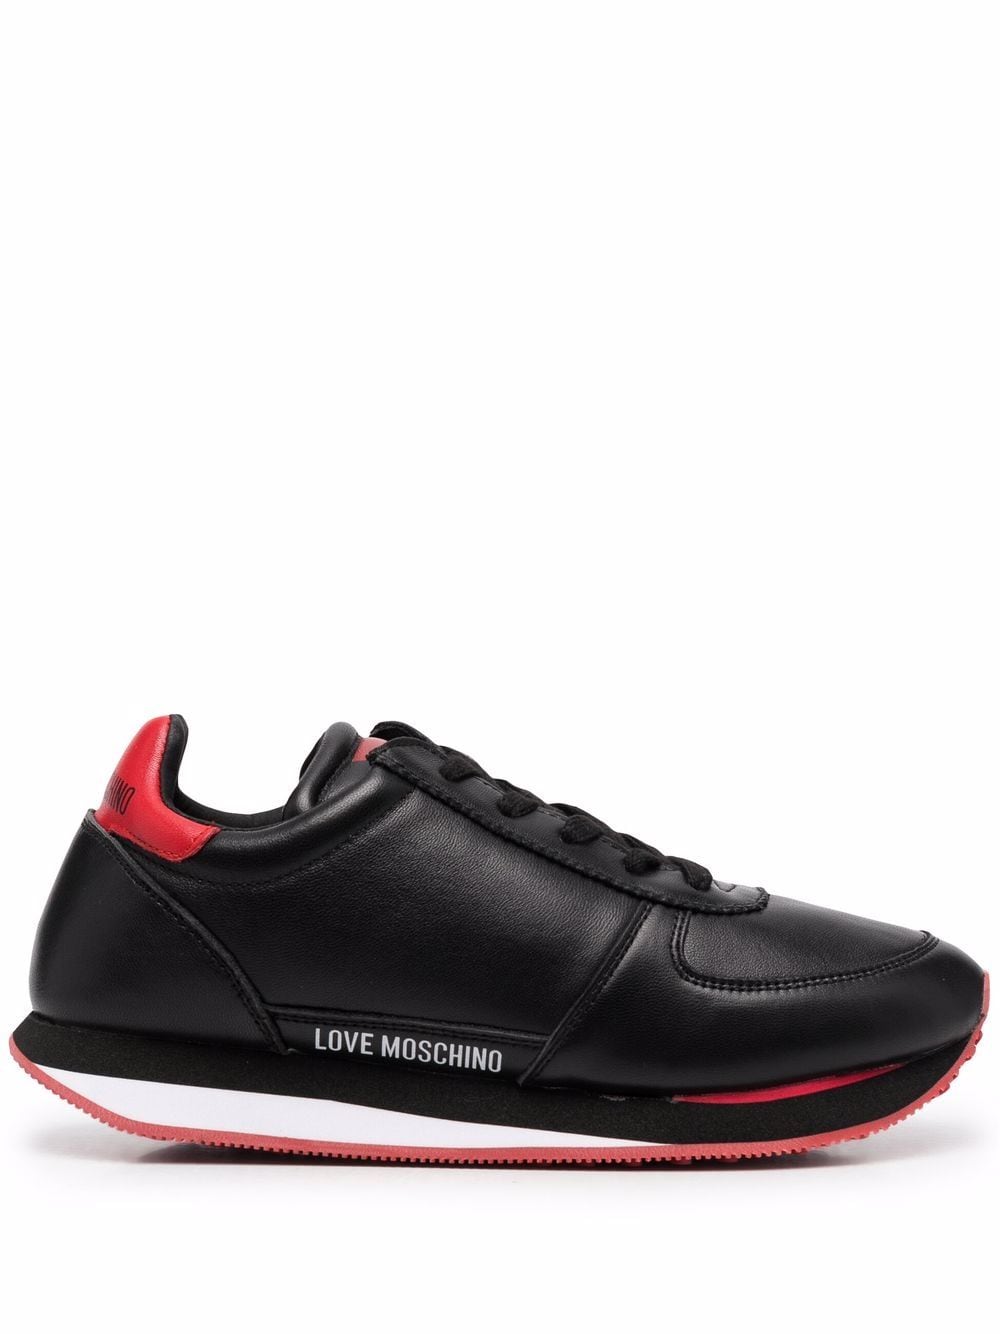 Love Moschino low-top lace-up sneakers - Black von Love Moschino